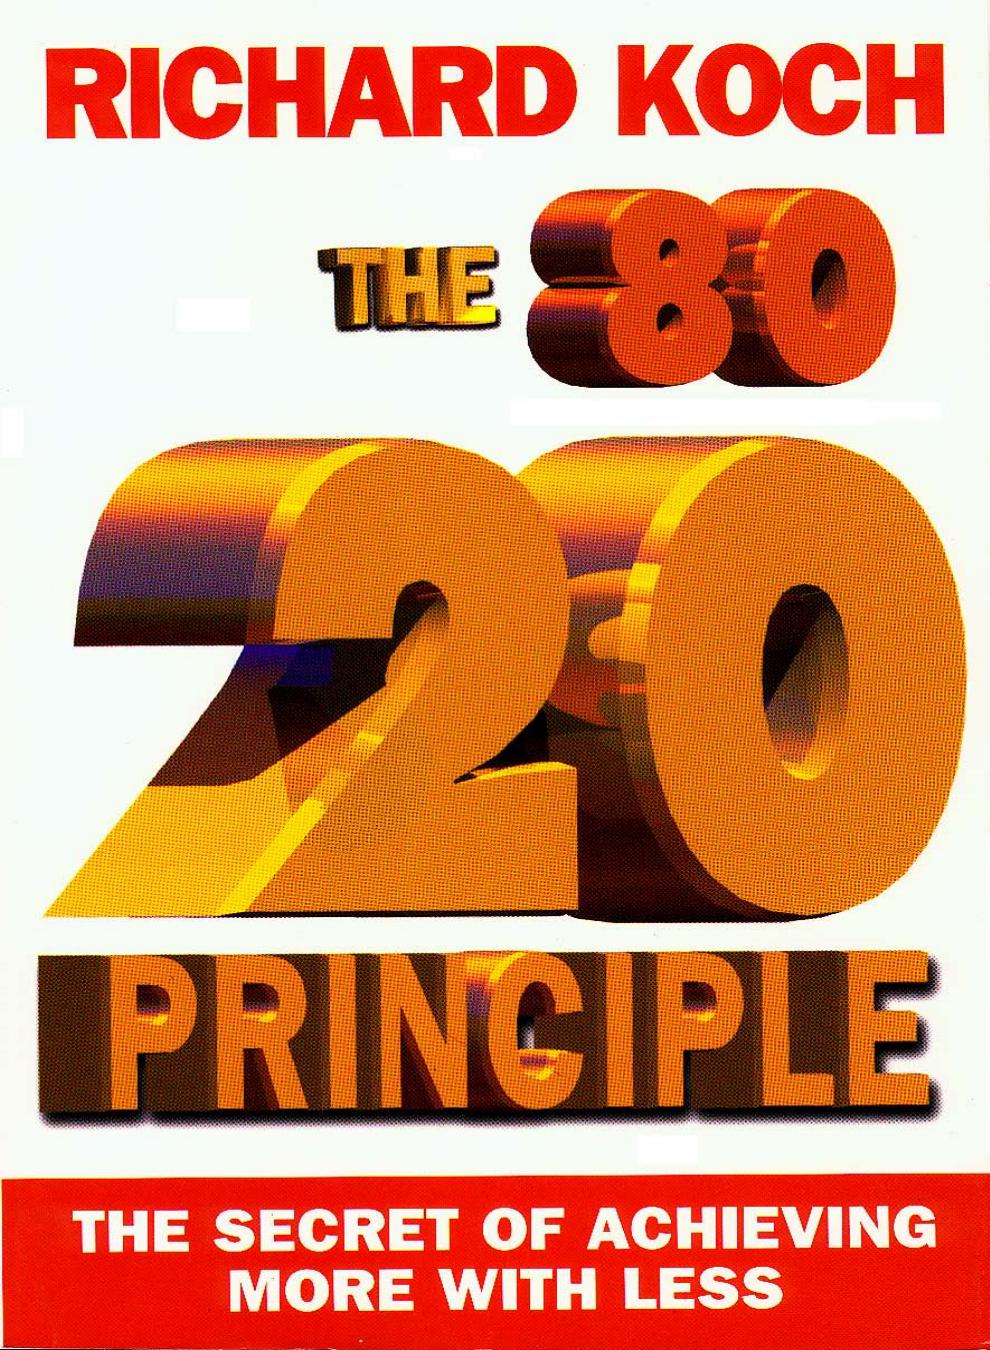 The 80/20 Principle: The Secret of Achieving More With Less by Richard Koch